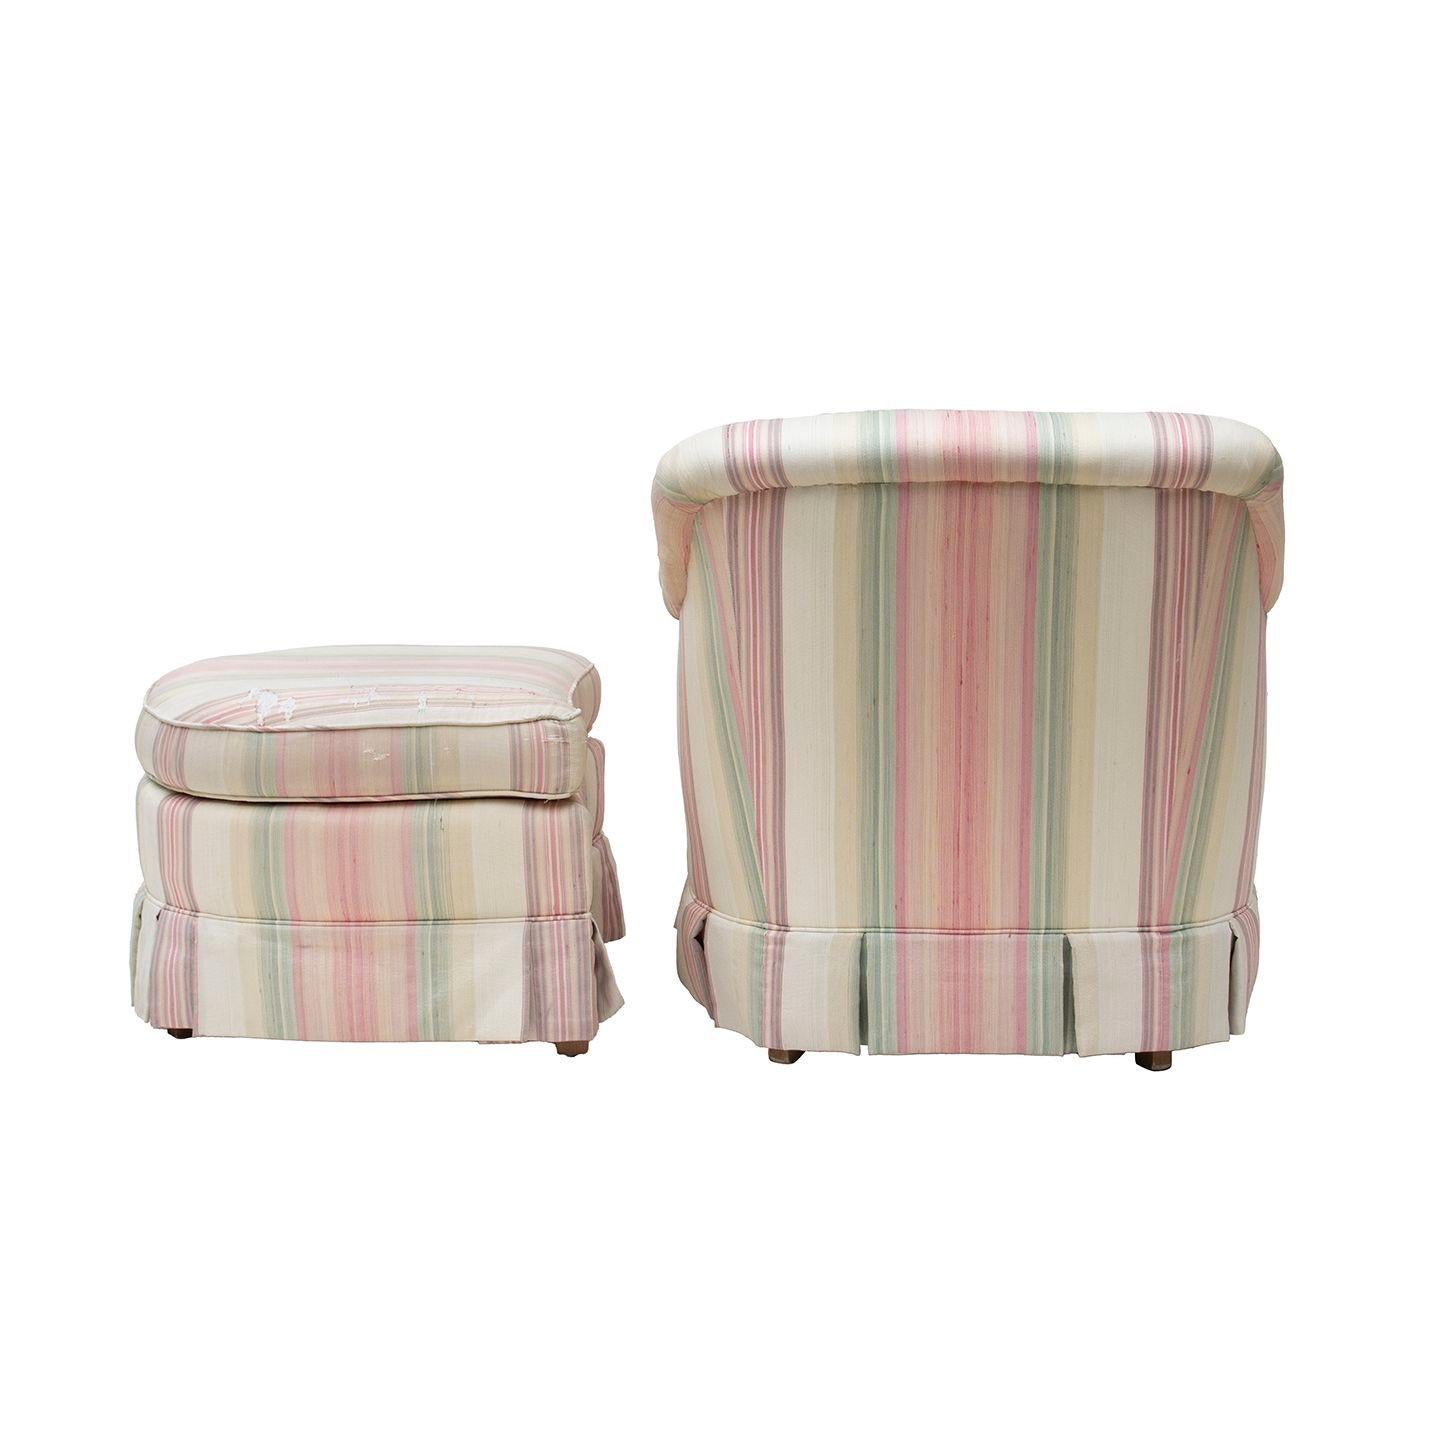 Late 20th Century Petite Armchair and Ottoman by Sherrill For Sale